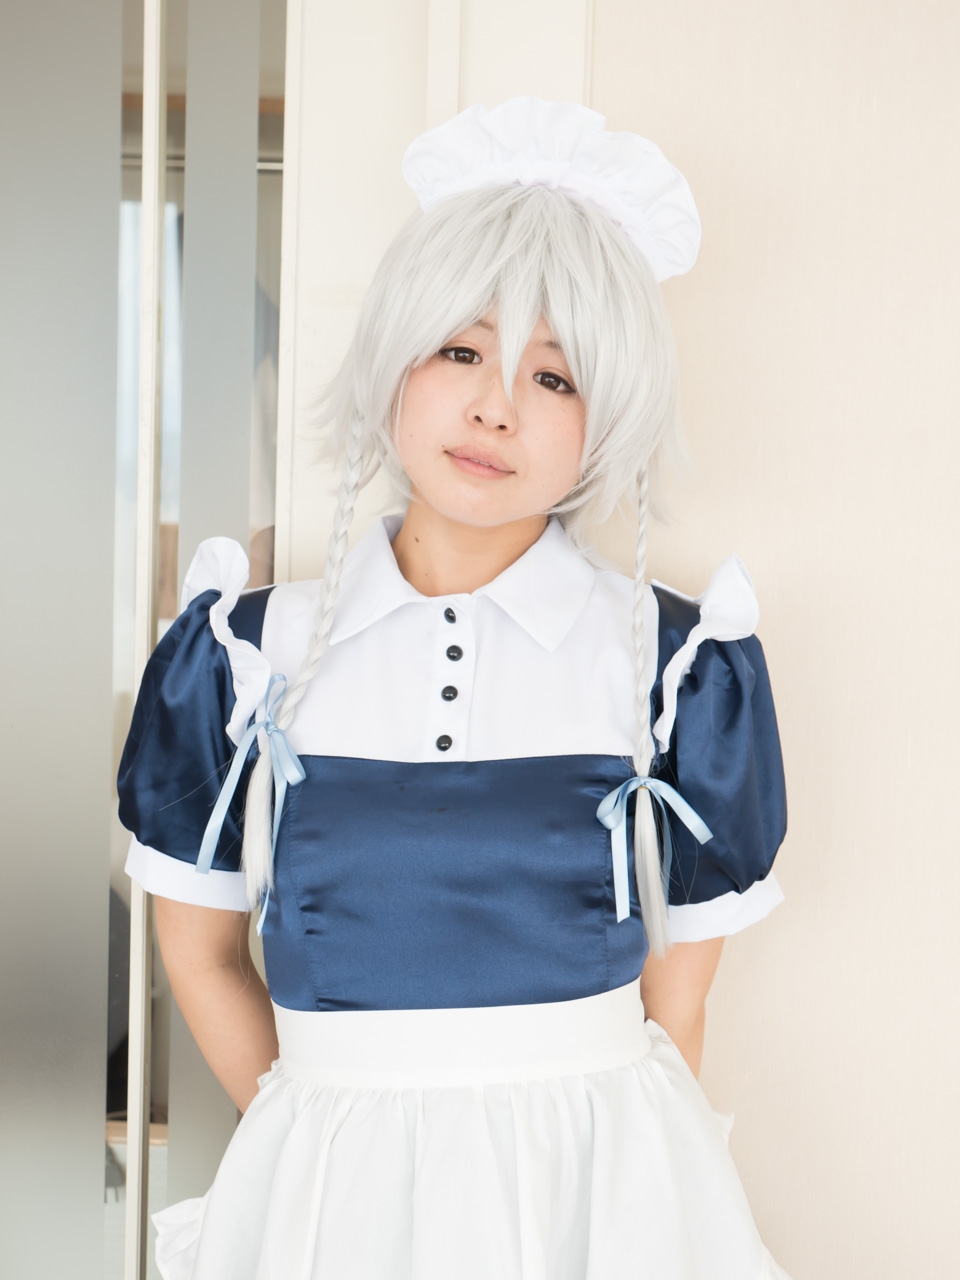 [Sakaki Cosplay Mistress] Sakaki Cosplay Mistress DL 001 (Touhou Project) 178